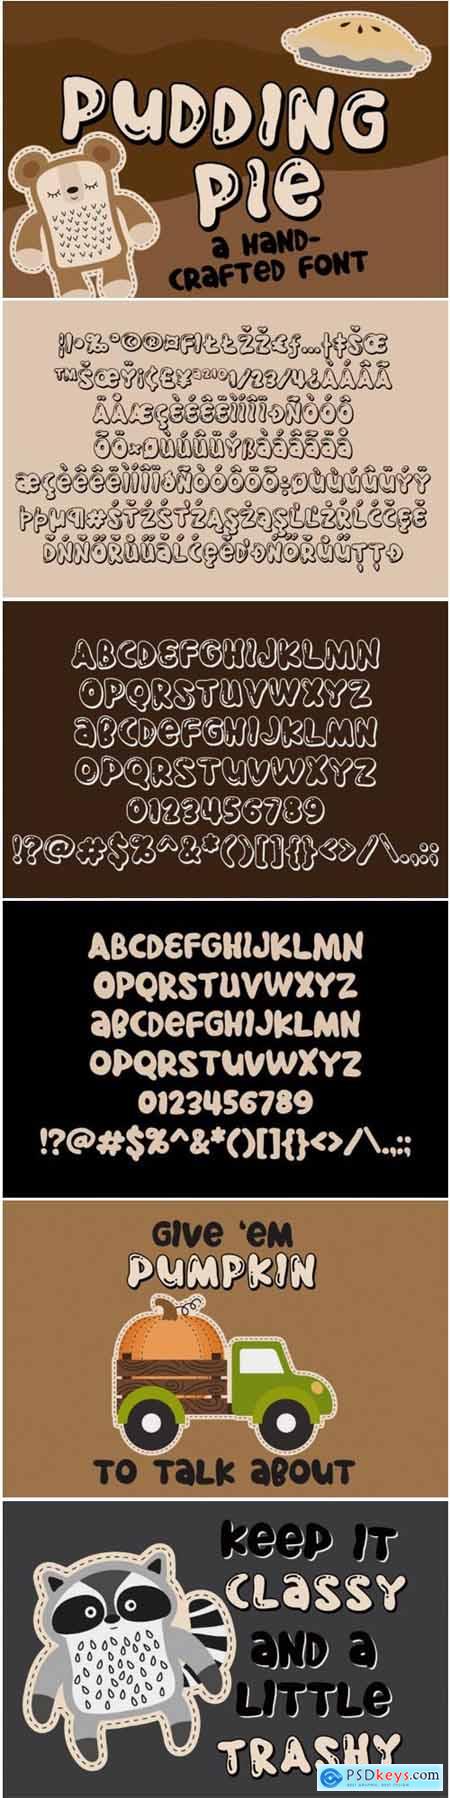 Pudding Pie Duo Font